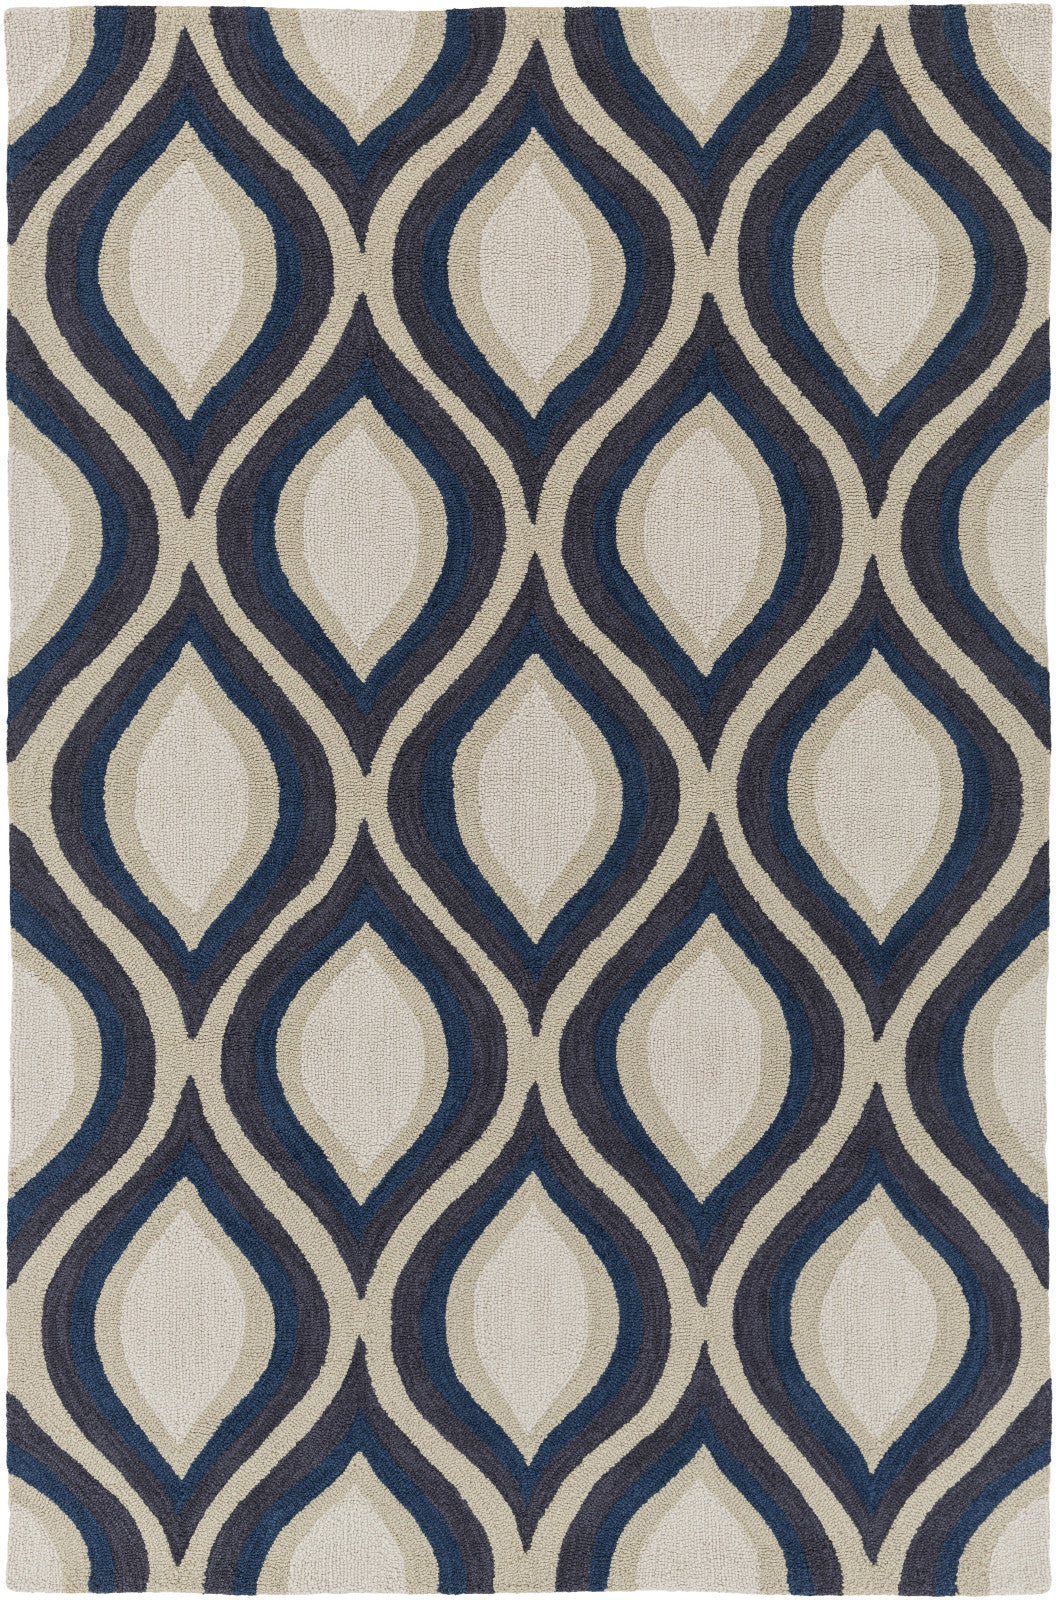 Artistic Weavers Holden Lucy Navy Blue/Charcoal Area Rug main image